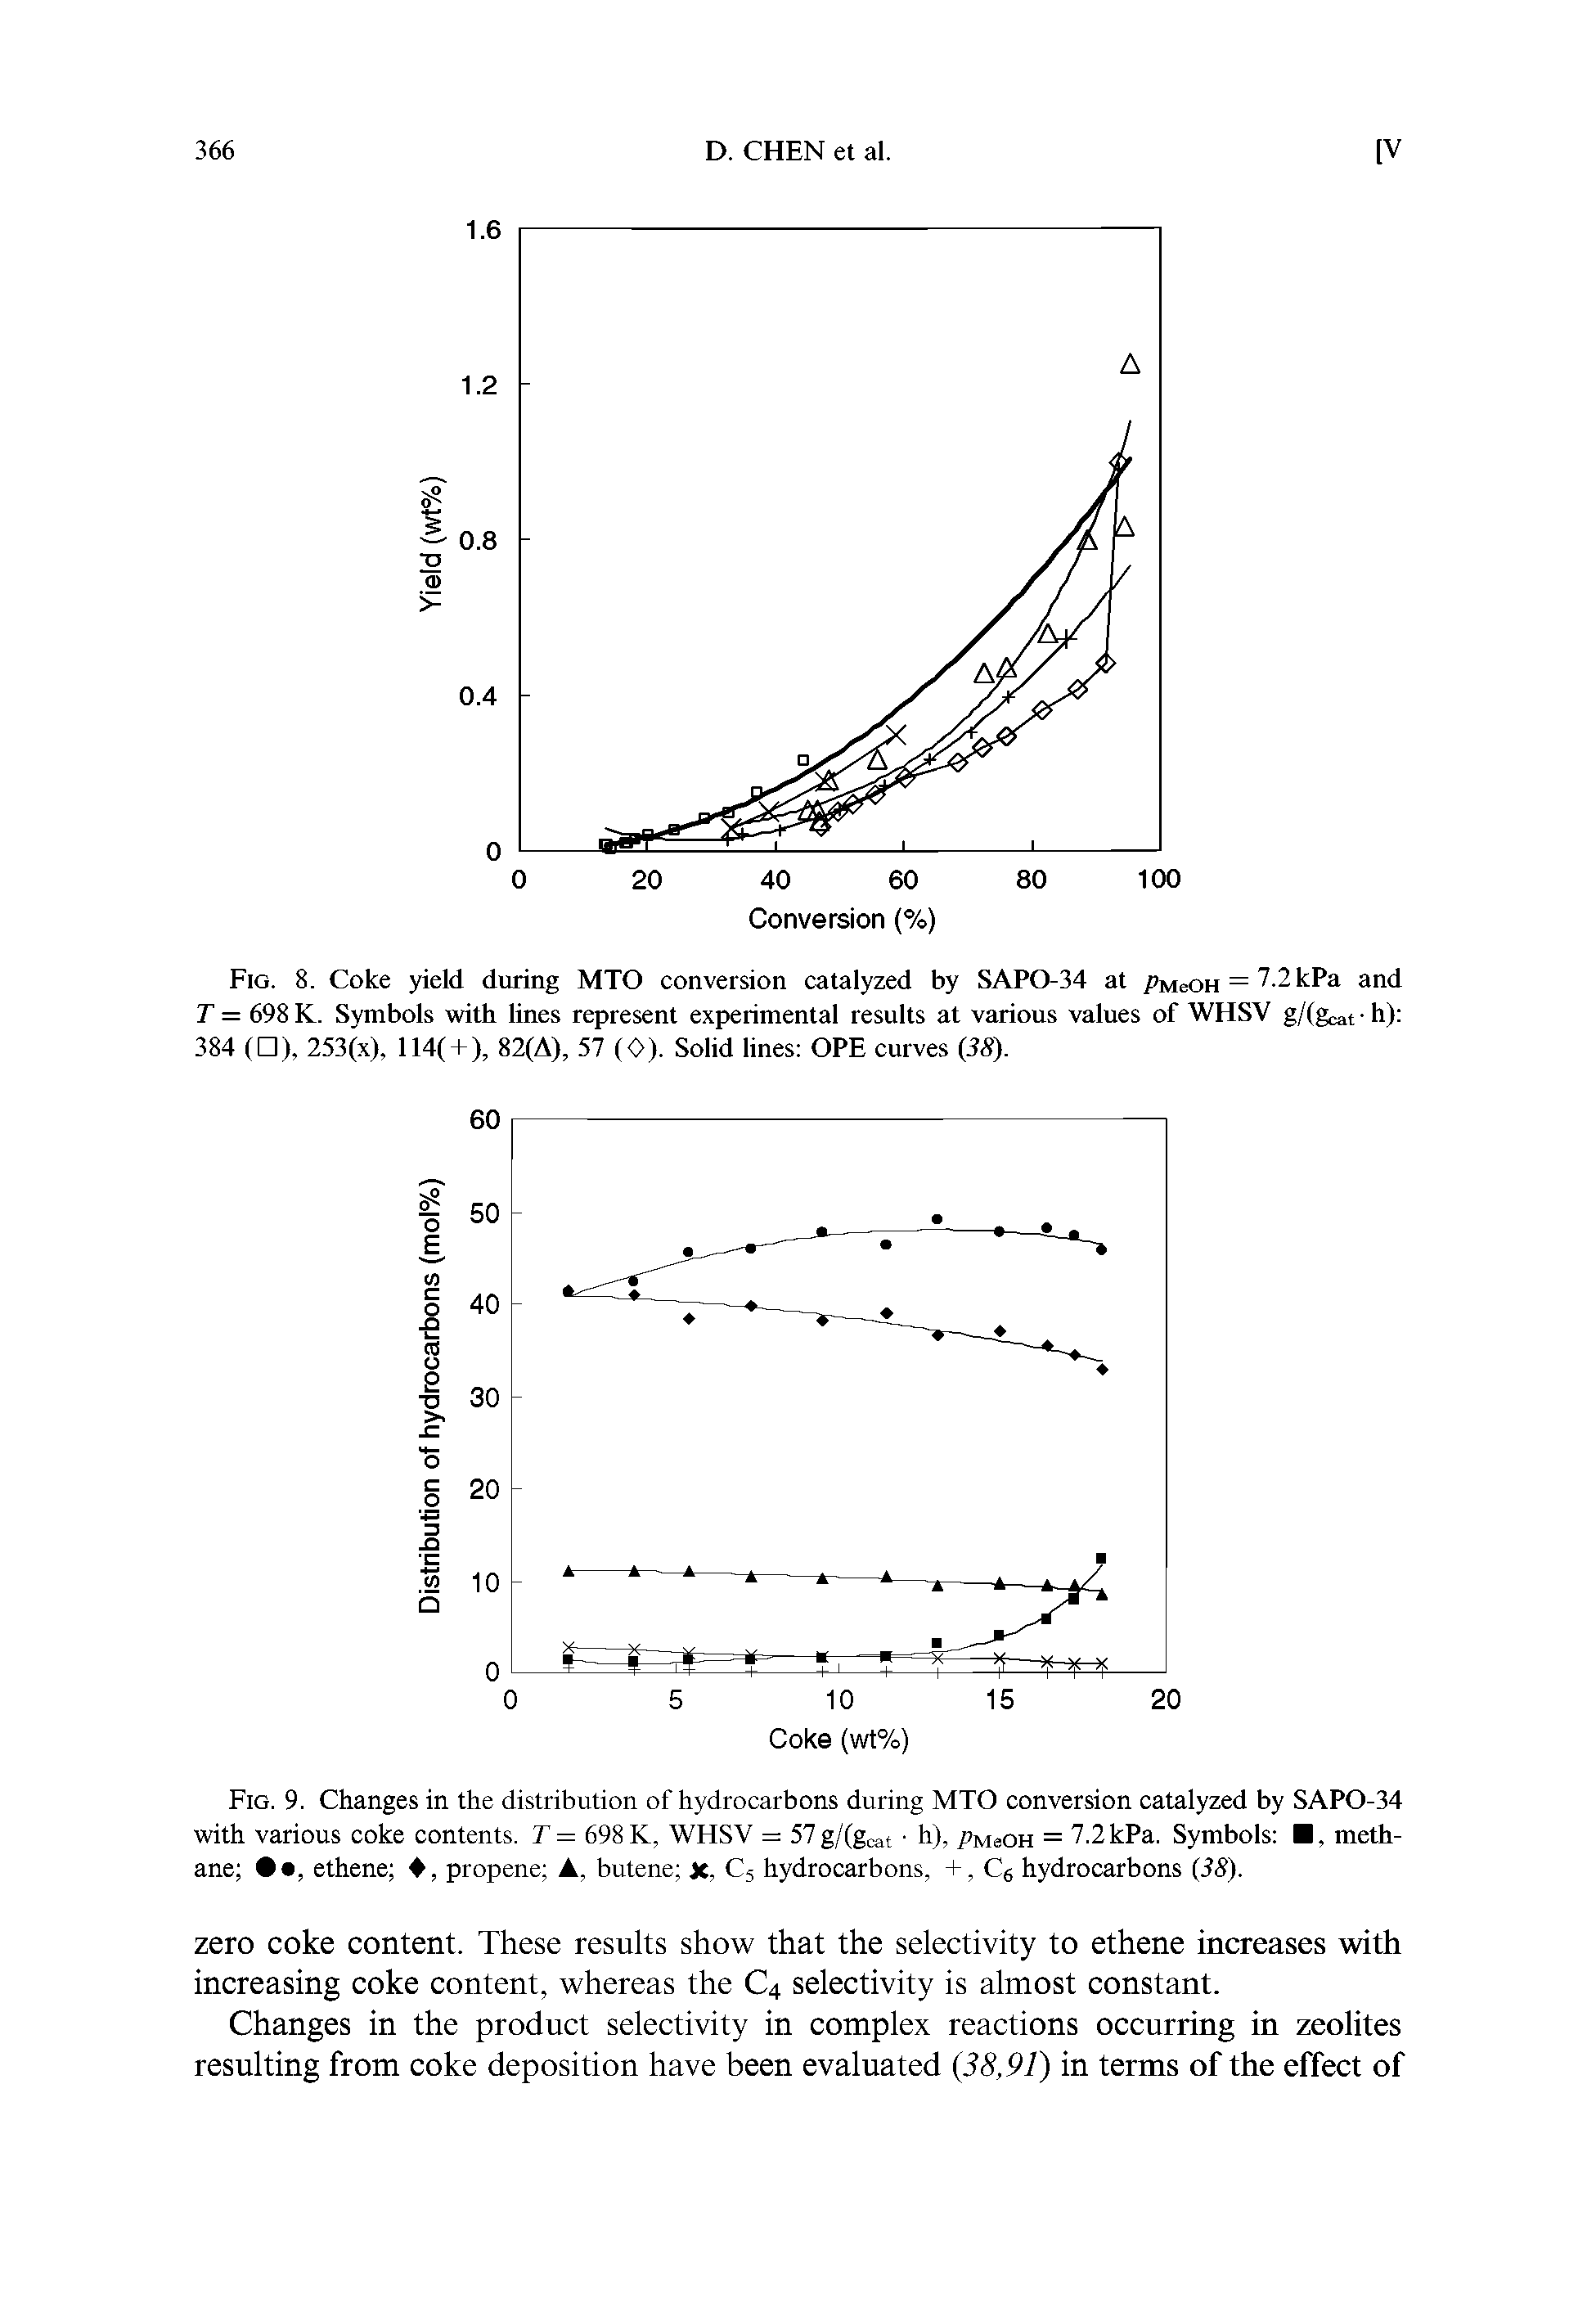 Fig. 9. Changes in the distribution of hydrocarbons during MTO conversion catalyzed by SAPO-34 with various coke contents. T = 698 K, WHSV = 57g/(gcat h), pMeon = 7.2 kPa. Symbols , methane ethene , propene , butene X, C5 hydrocarbons, +, Cj hydrocarbons (3S).